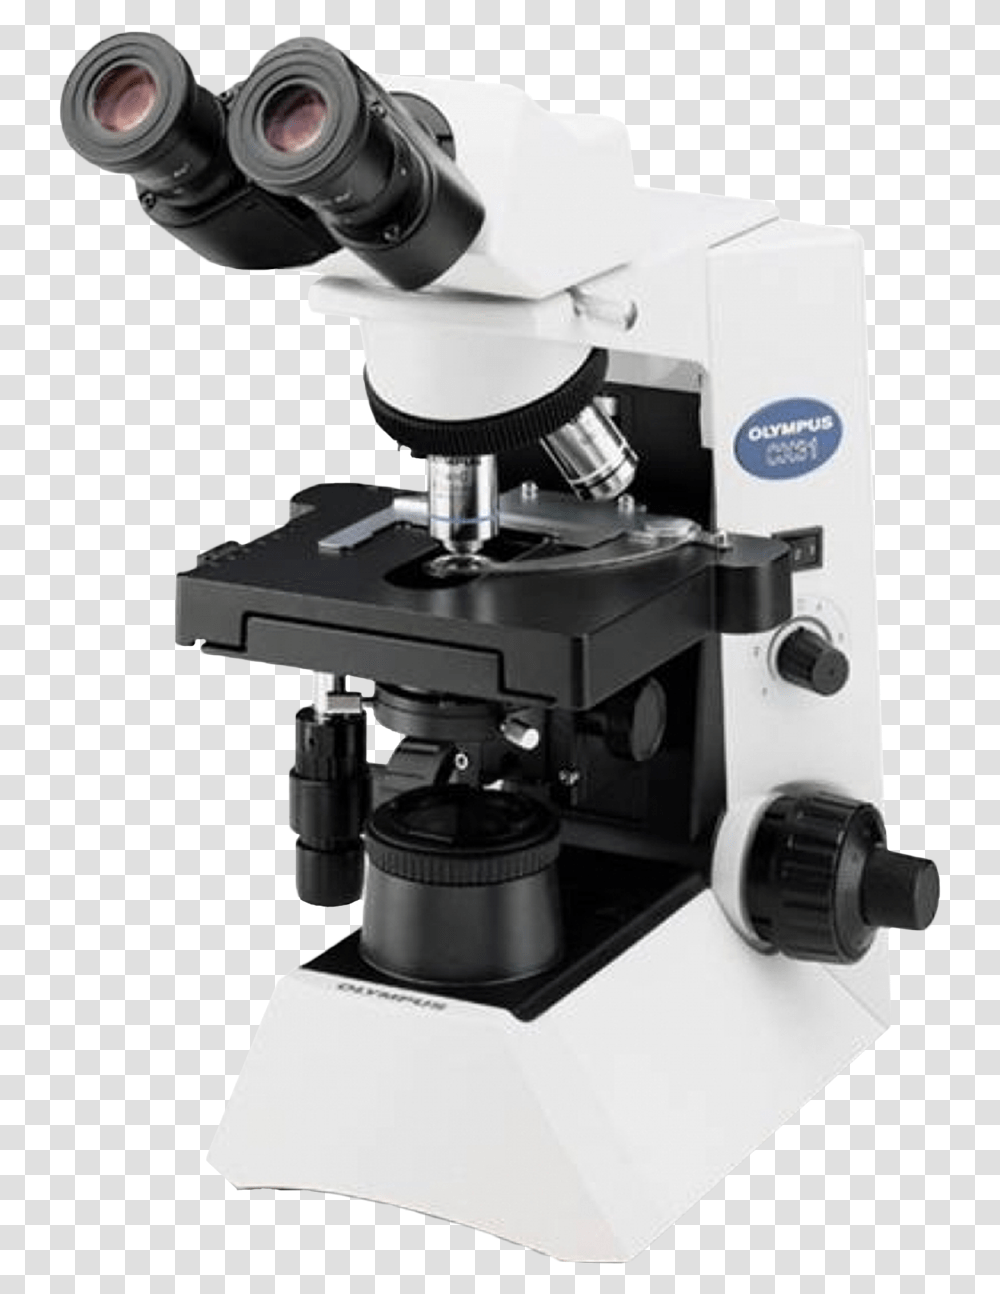 Microscope Olympus Cx, Mixer, Appliance Transparent Png